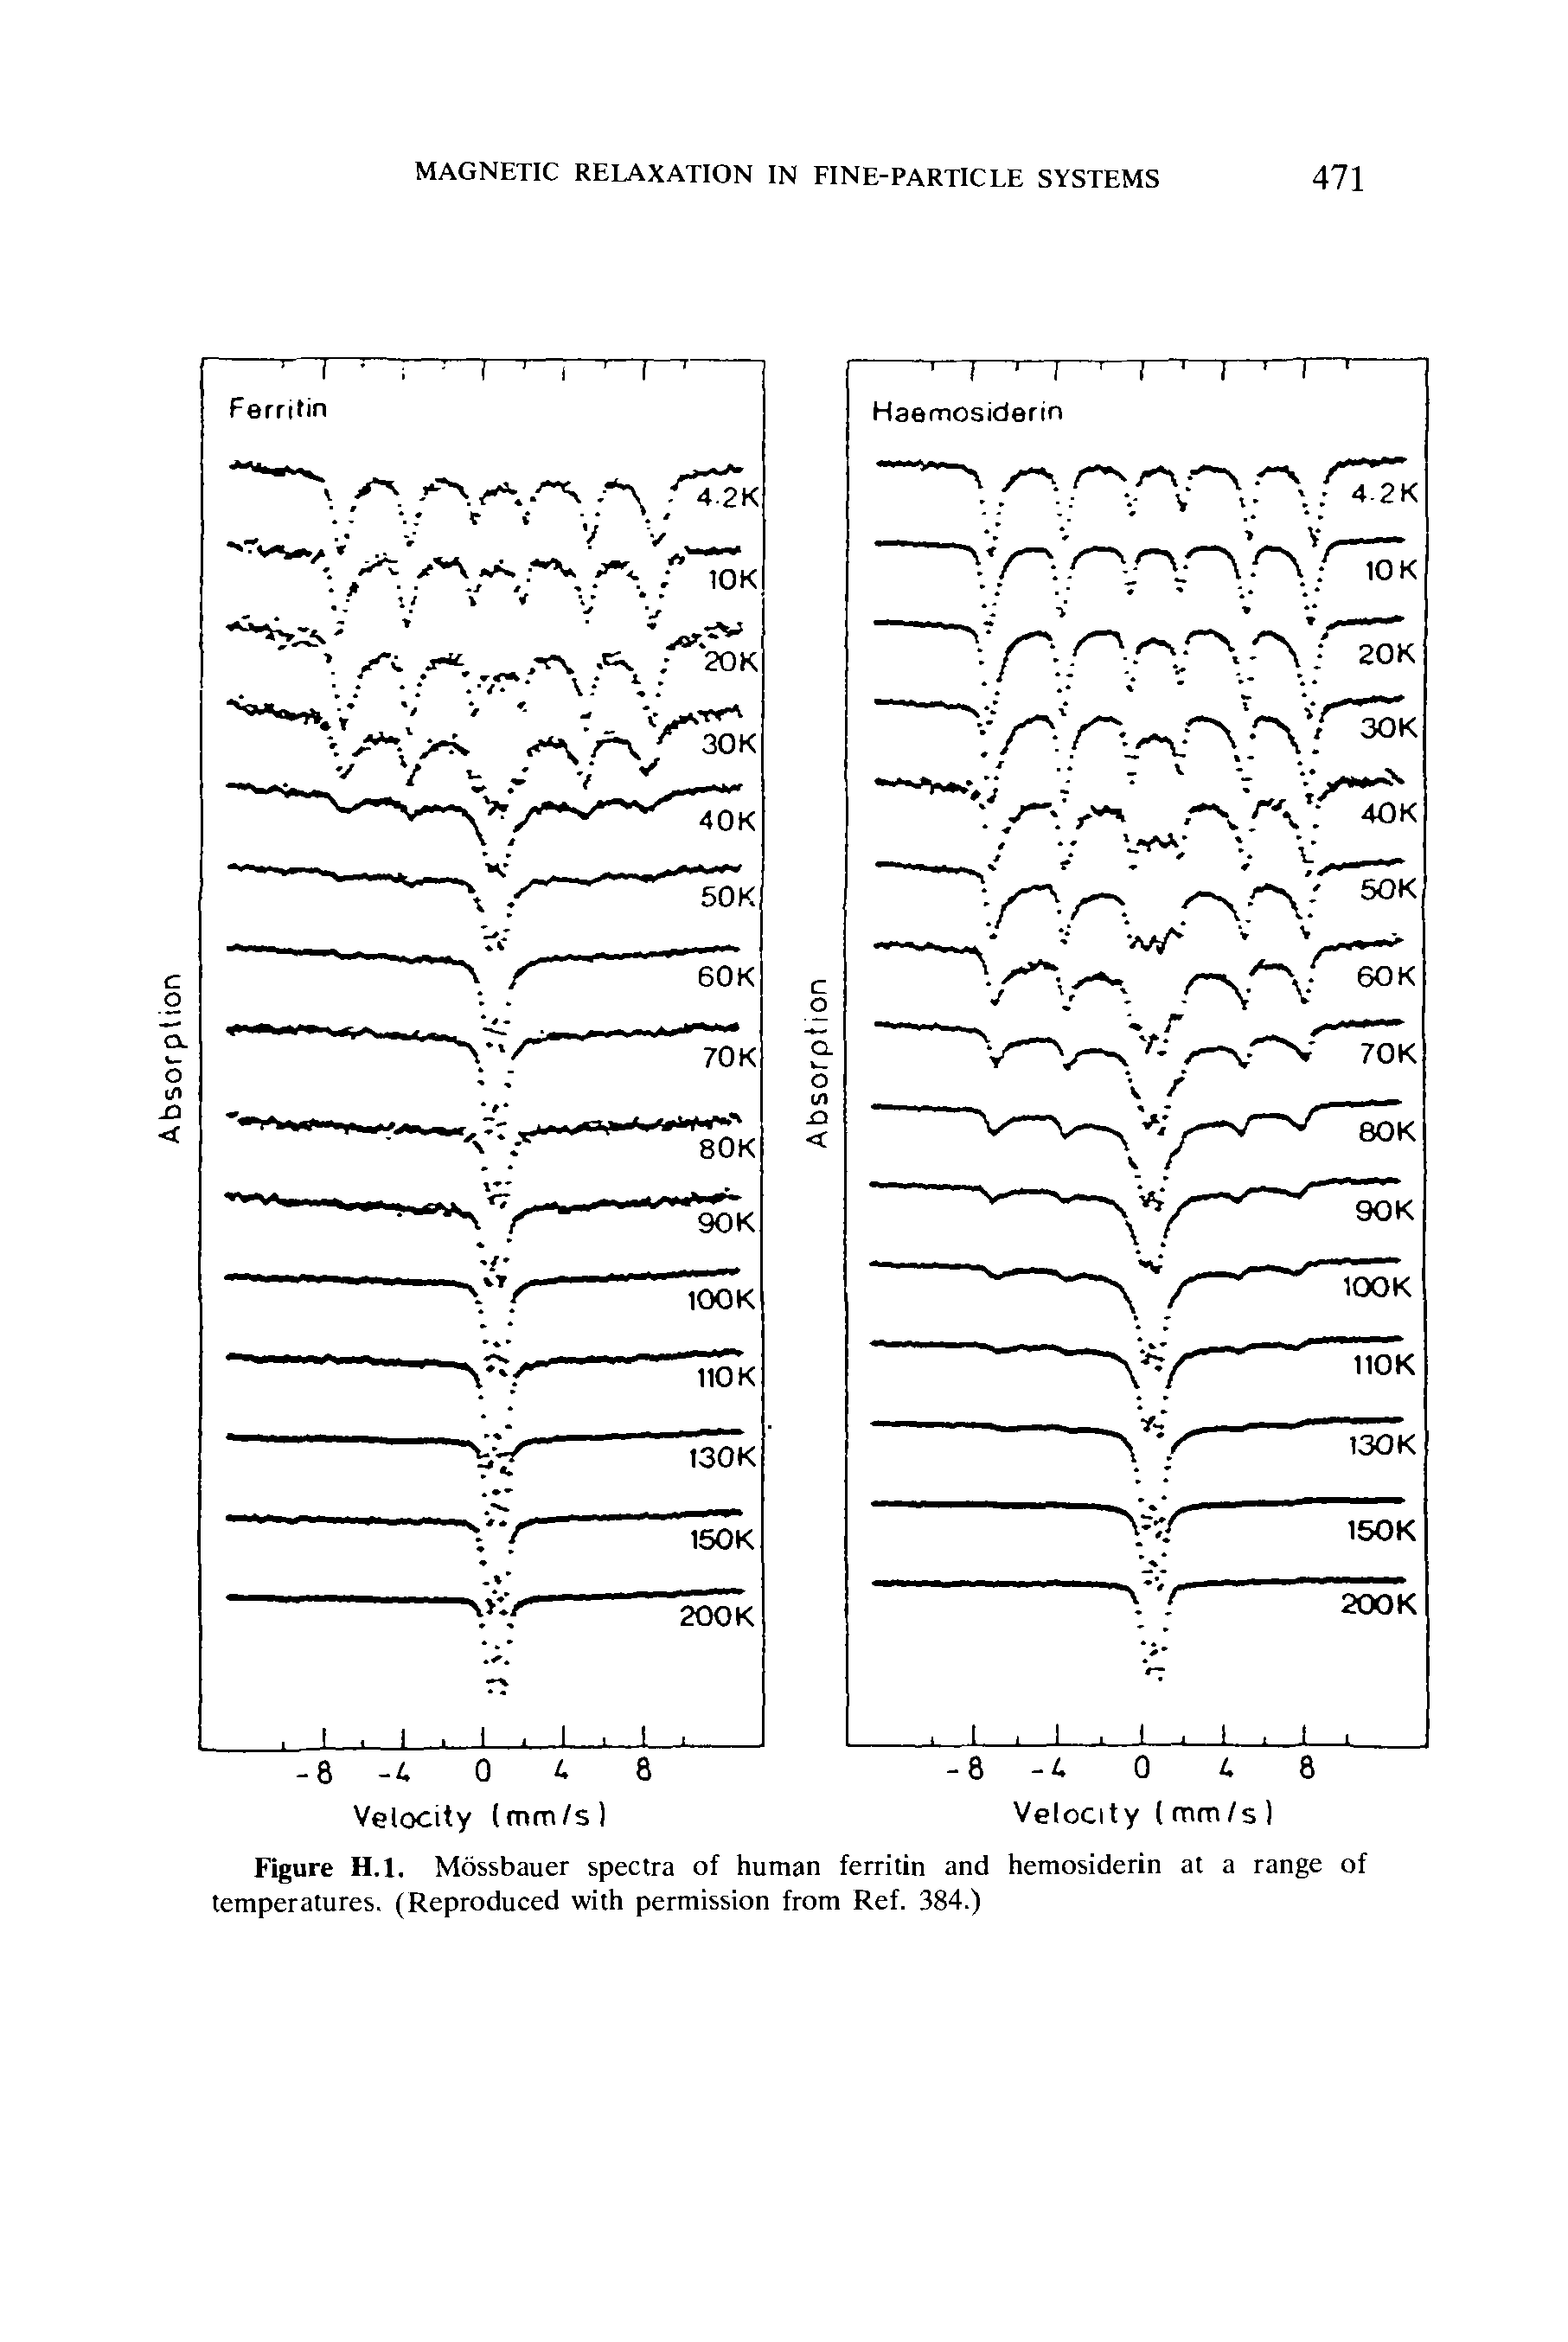 Figure H.l. Mossbauer spectra of human ferritin and hemosiderin at a range of temperatures. (Reproduced with permission from Ref. 384.)...